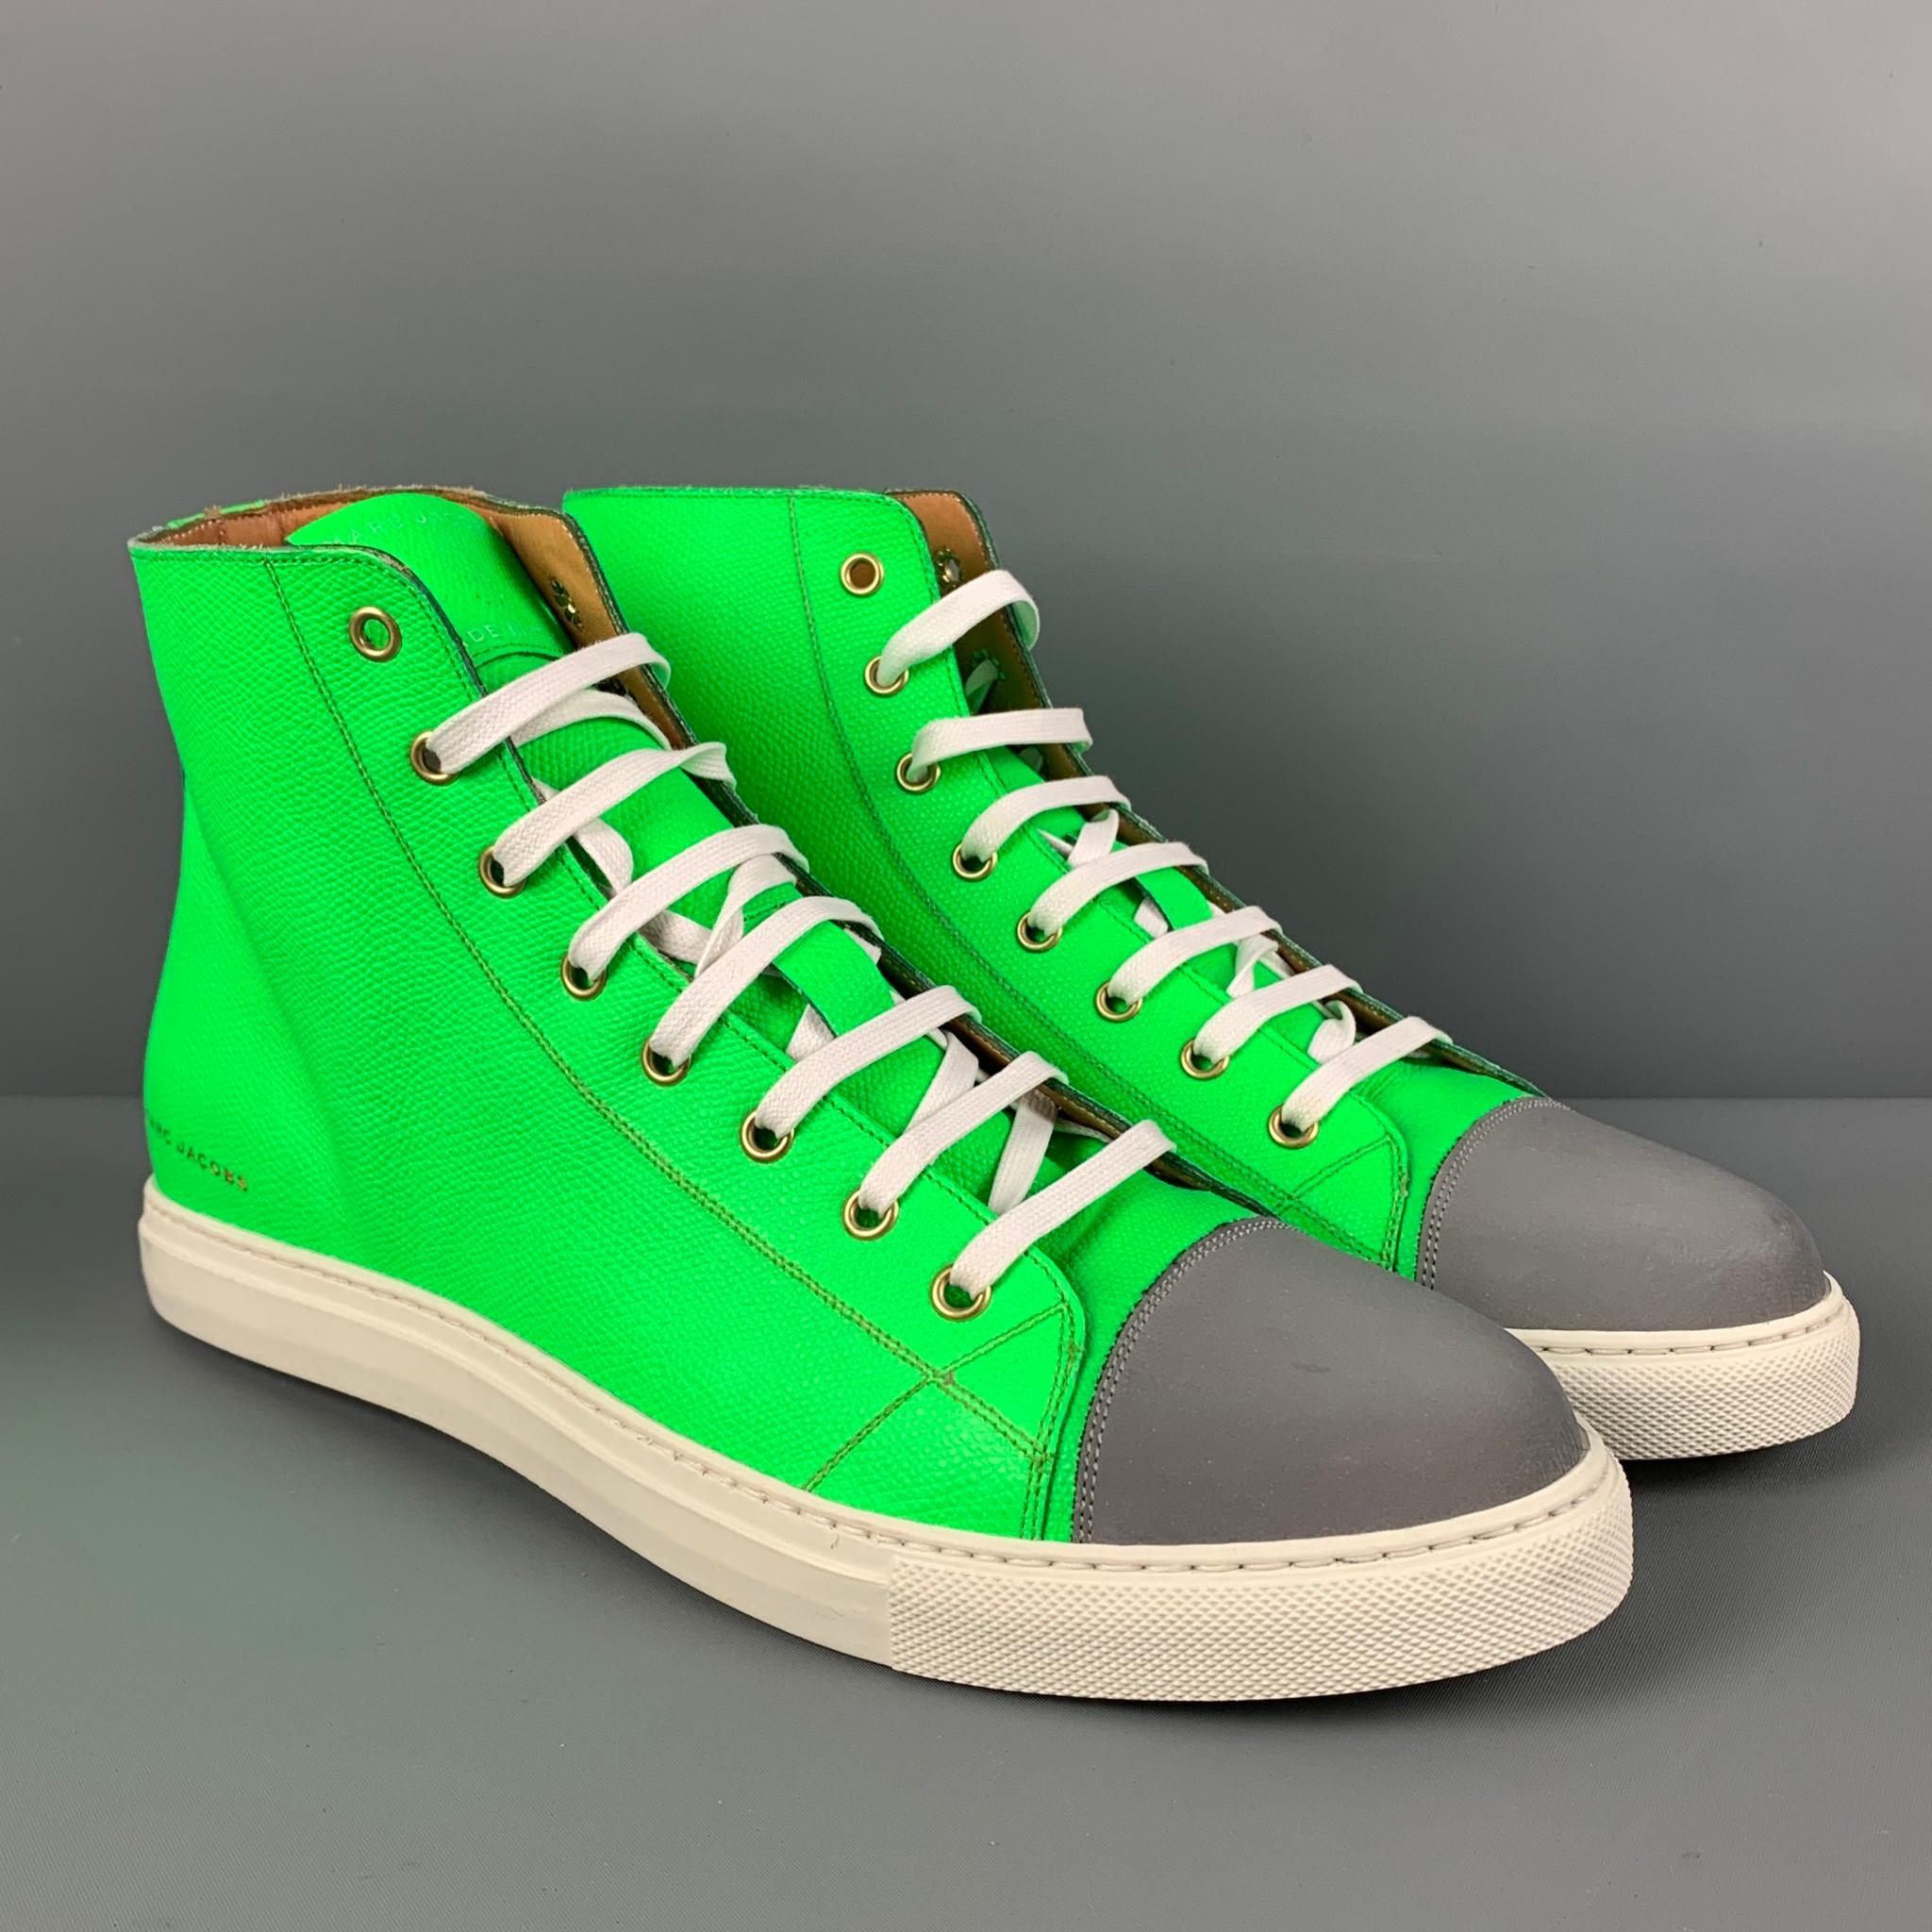 MARC JACOBS shoes comes in a green & grey color color block leather featuring a high-top style, contrast stitching, and a lace up closure. Made in Italy.

Very Good Pre-Owned Condition.
Marked: 9-43

Outsole: 12 in. x 4 in. 